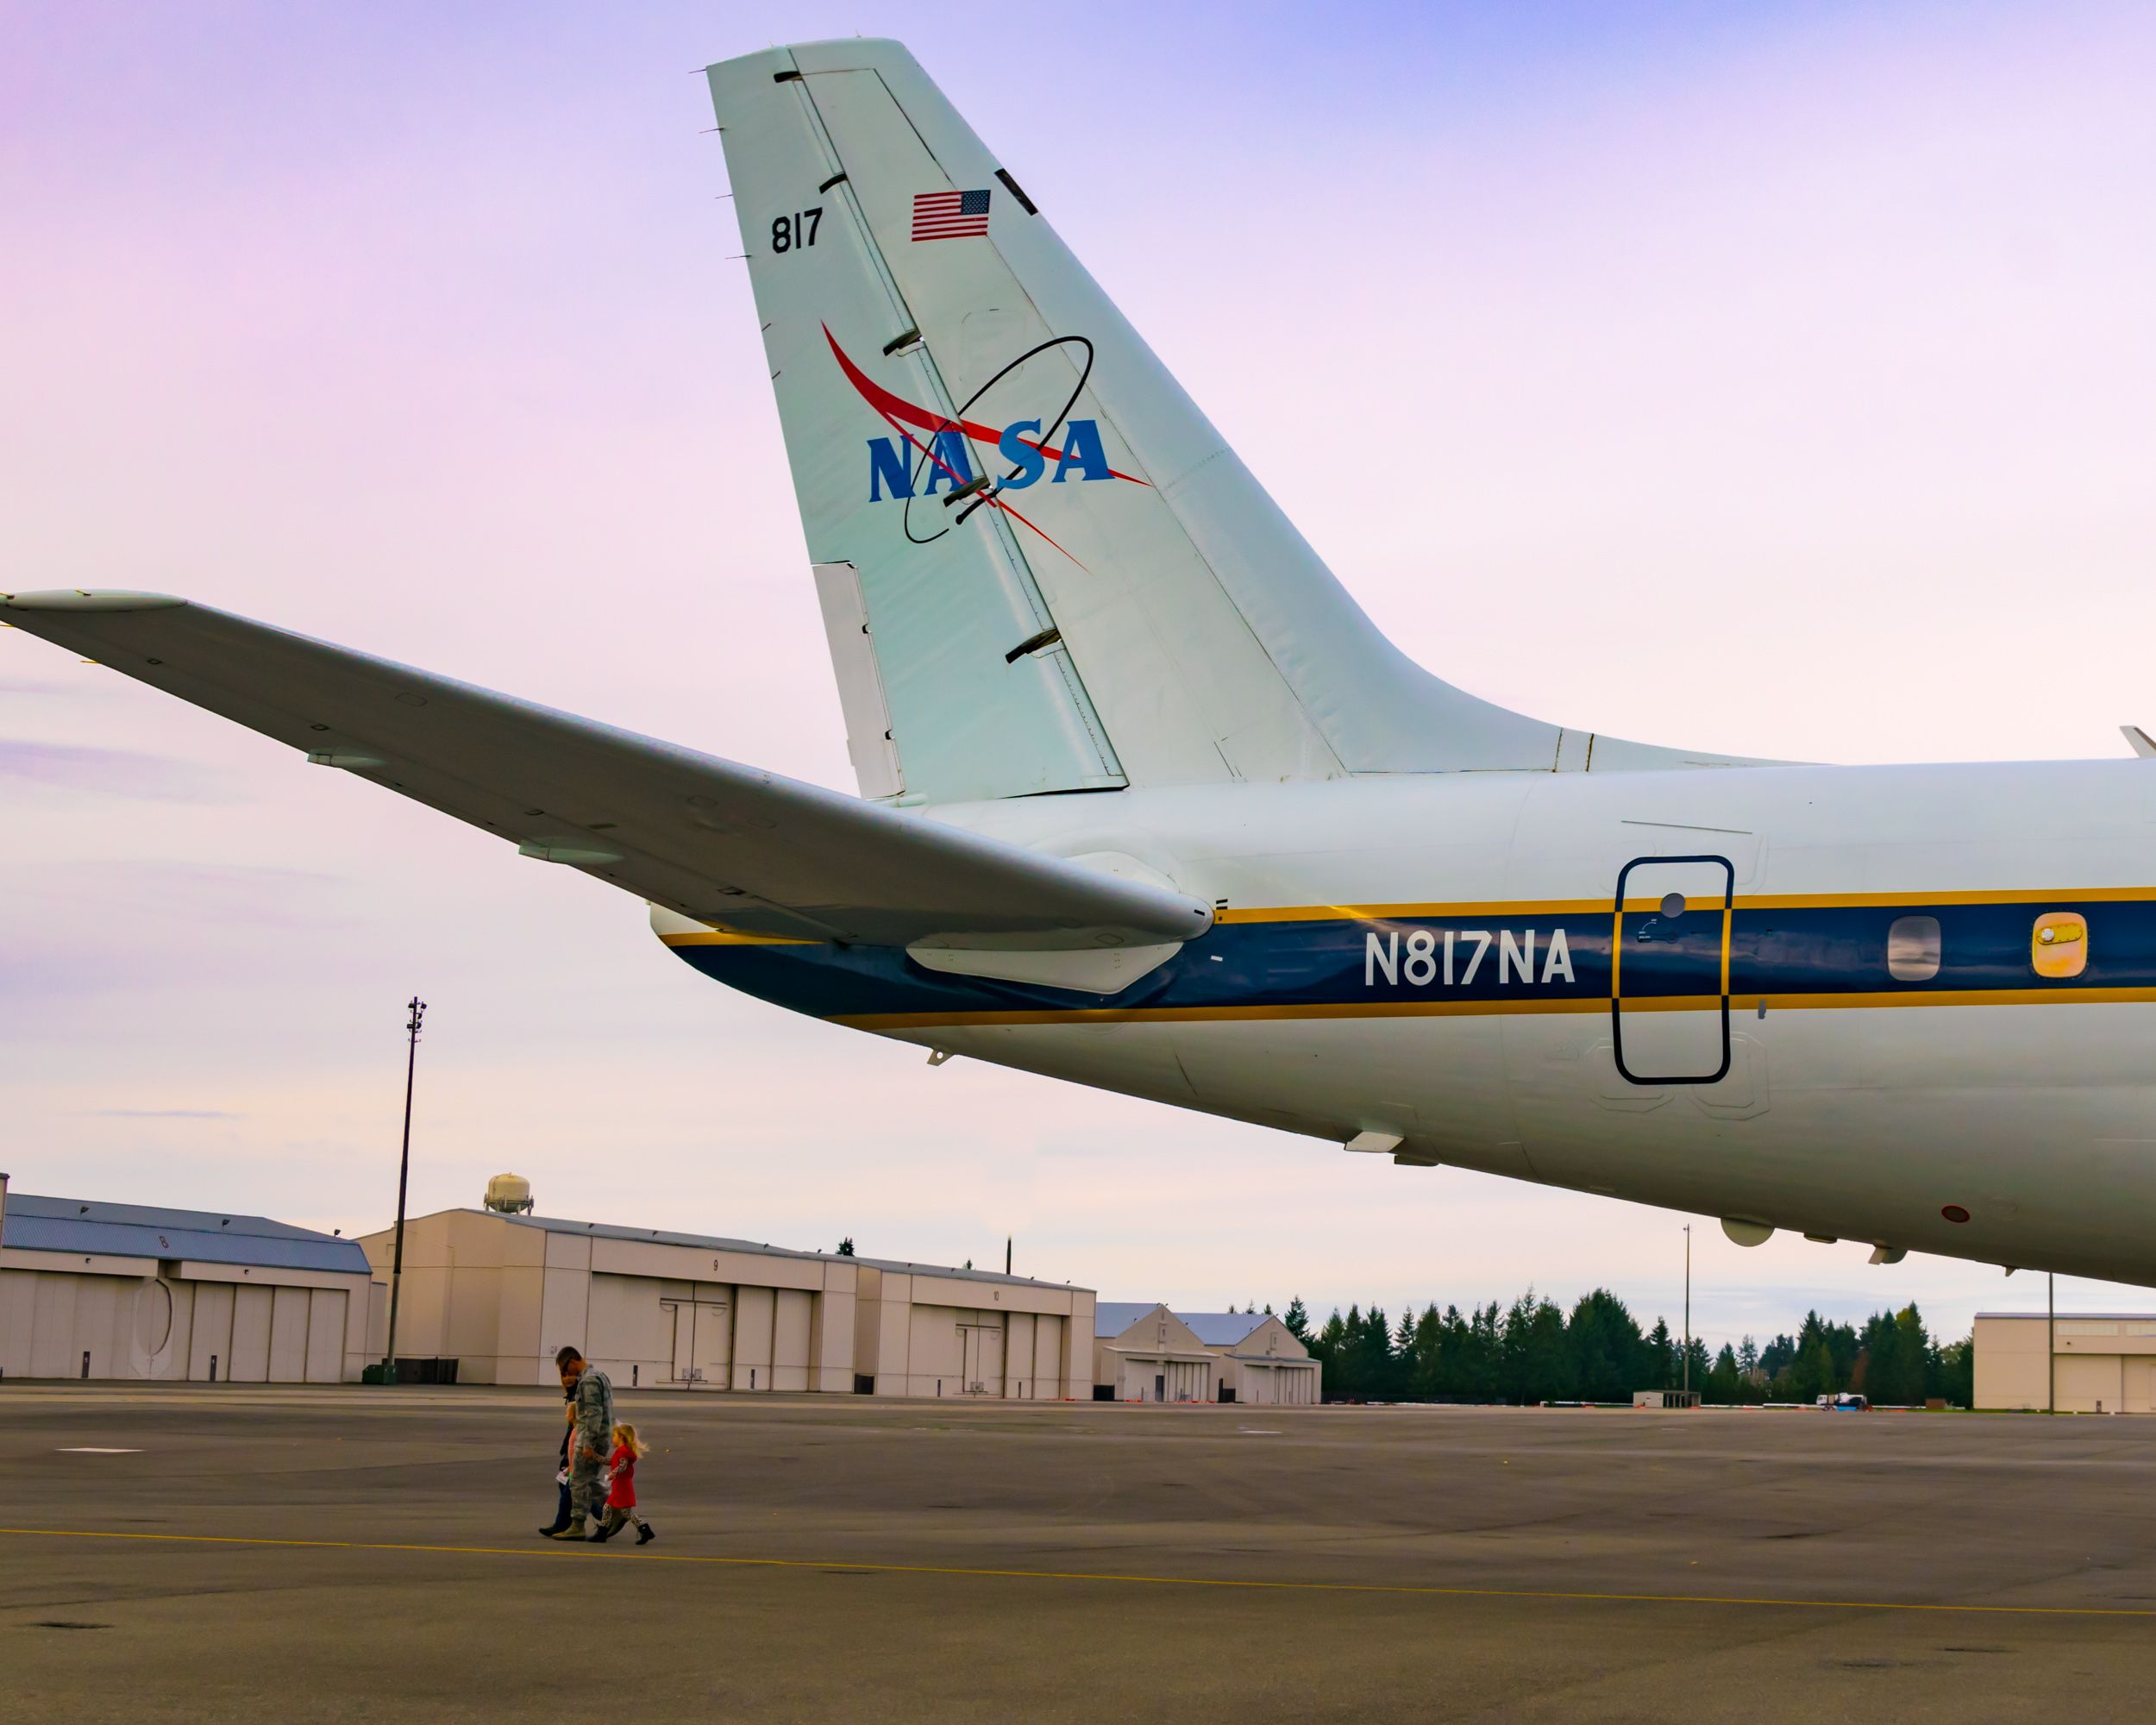 SF_TAIL OF DC-8_JAK